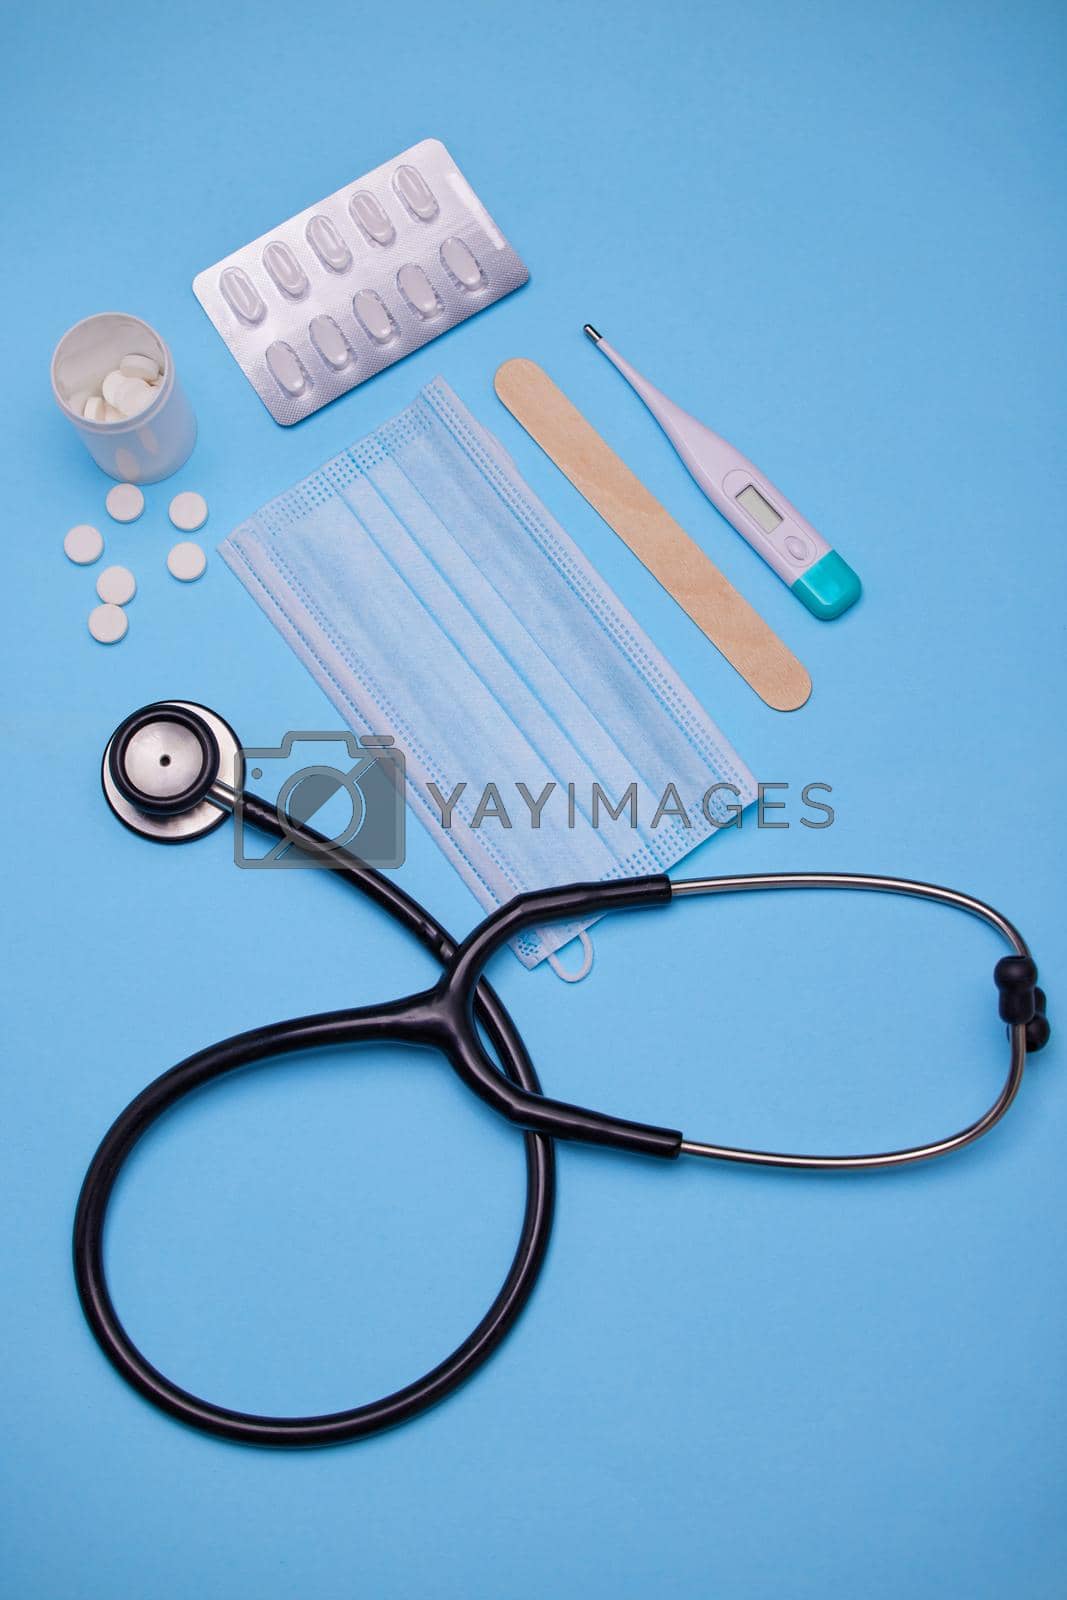 Royalty free image of See a doctor if youre feeling unwell. Studio shot of medical equipment against a blue background. by YuriArcurs